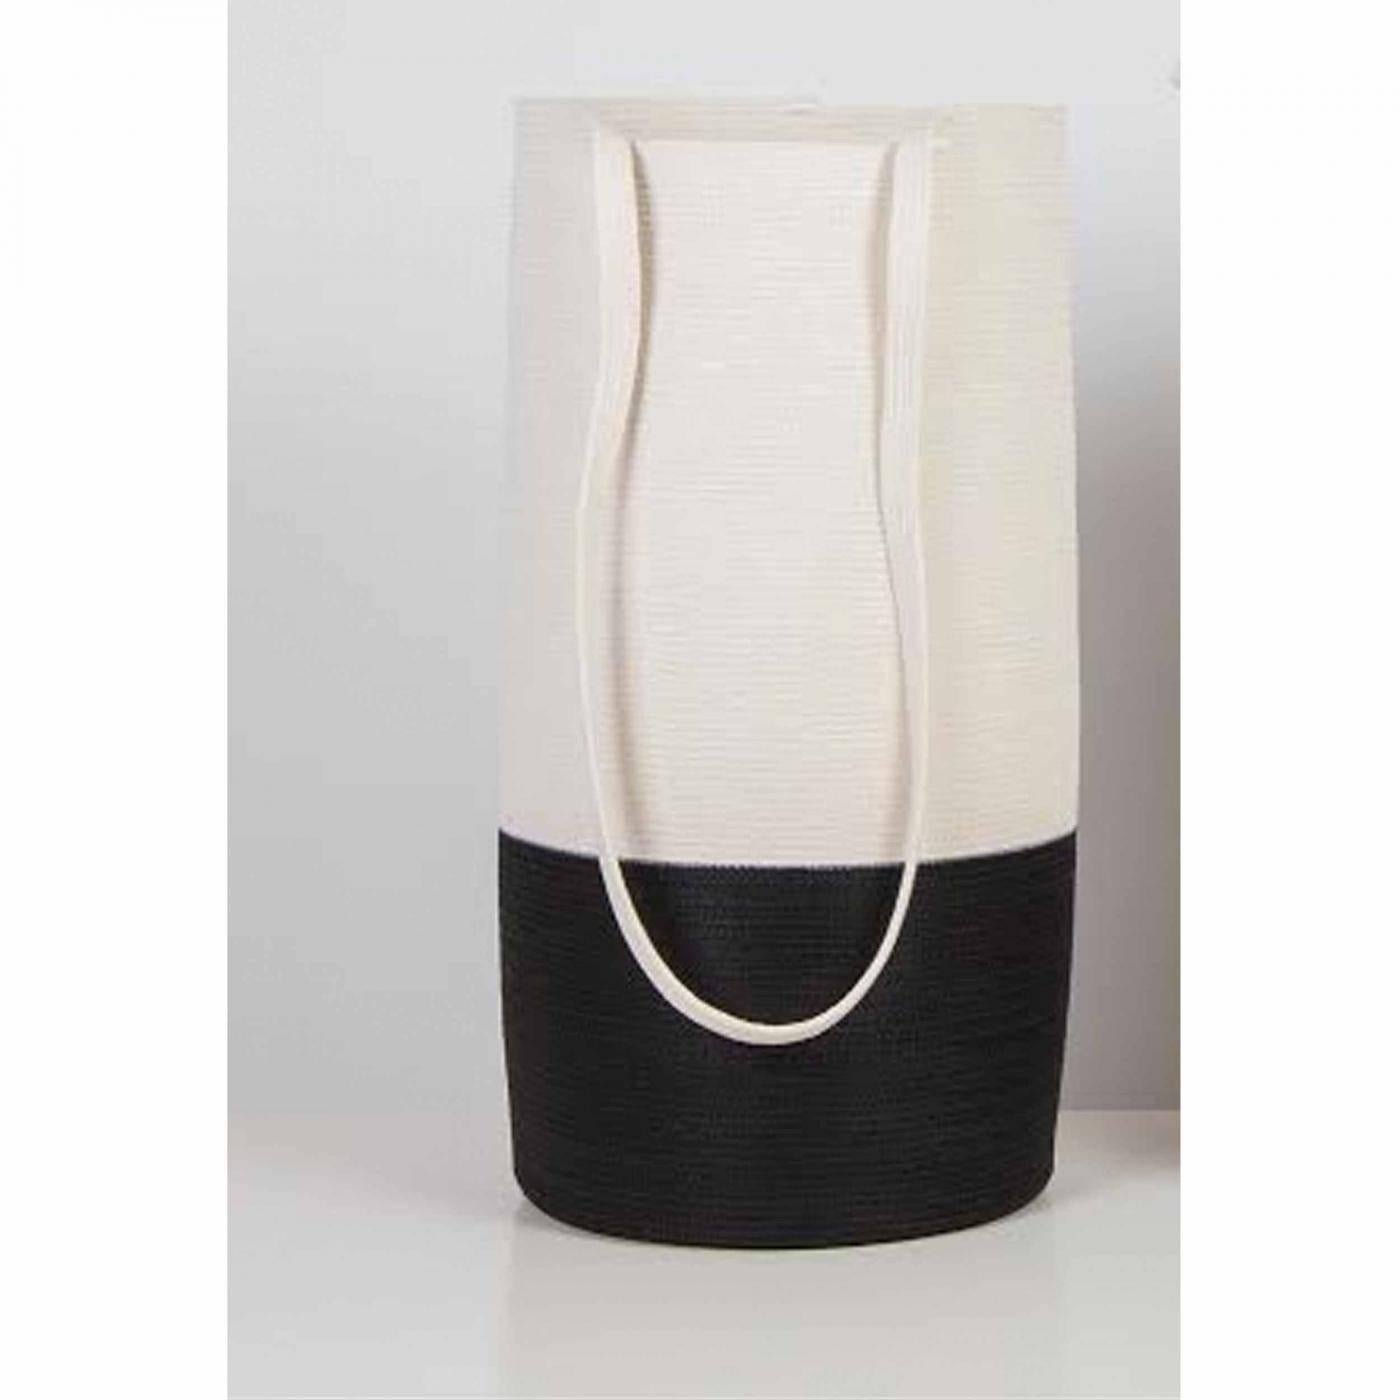 Doug Johnston Abstract Sculpture - TALL BASKET WITH LONG STRAP IN BLACK NYLON/WHITE COTTON